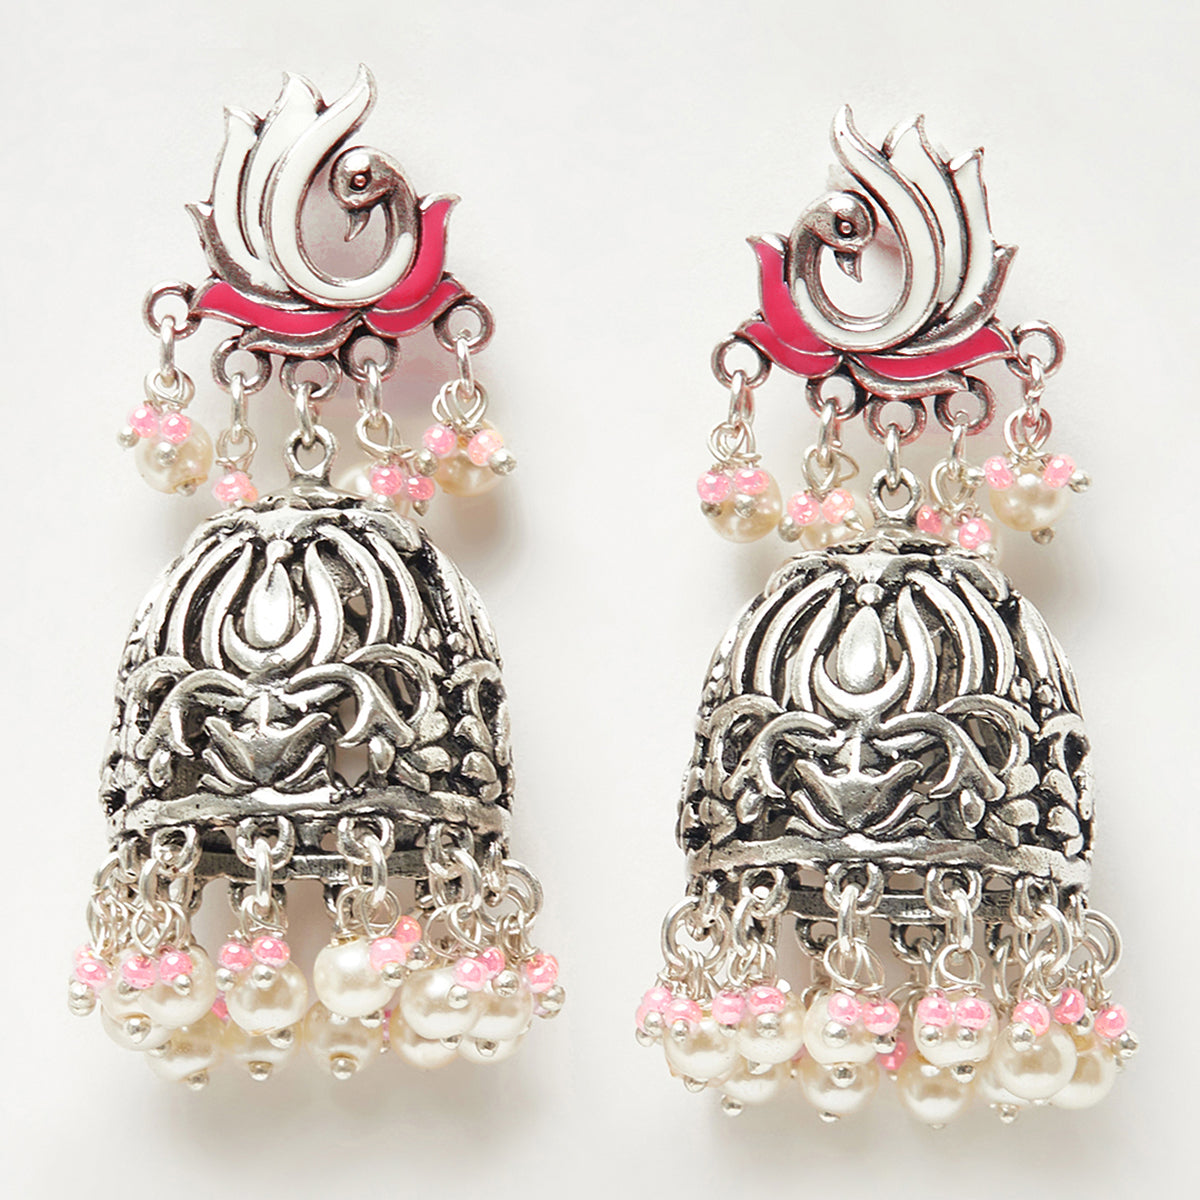 Shwet kamal Silver Necklace with Earrings